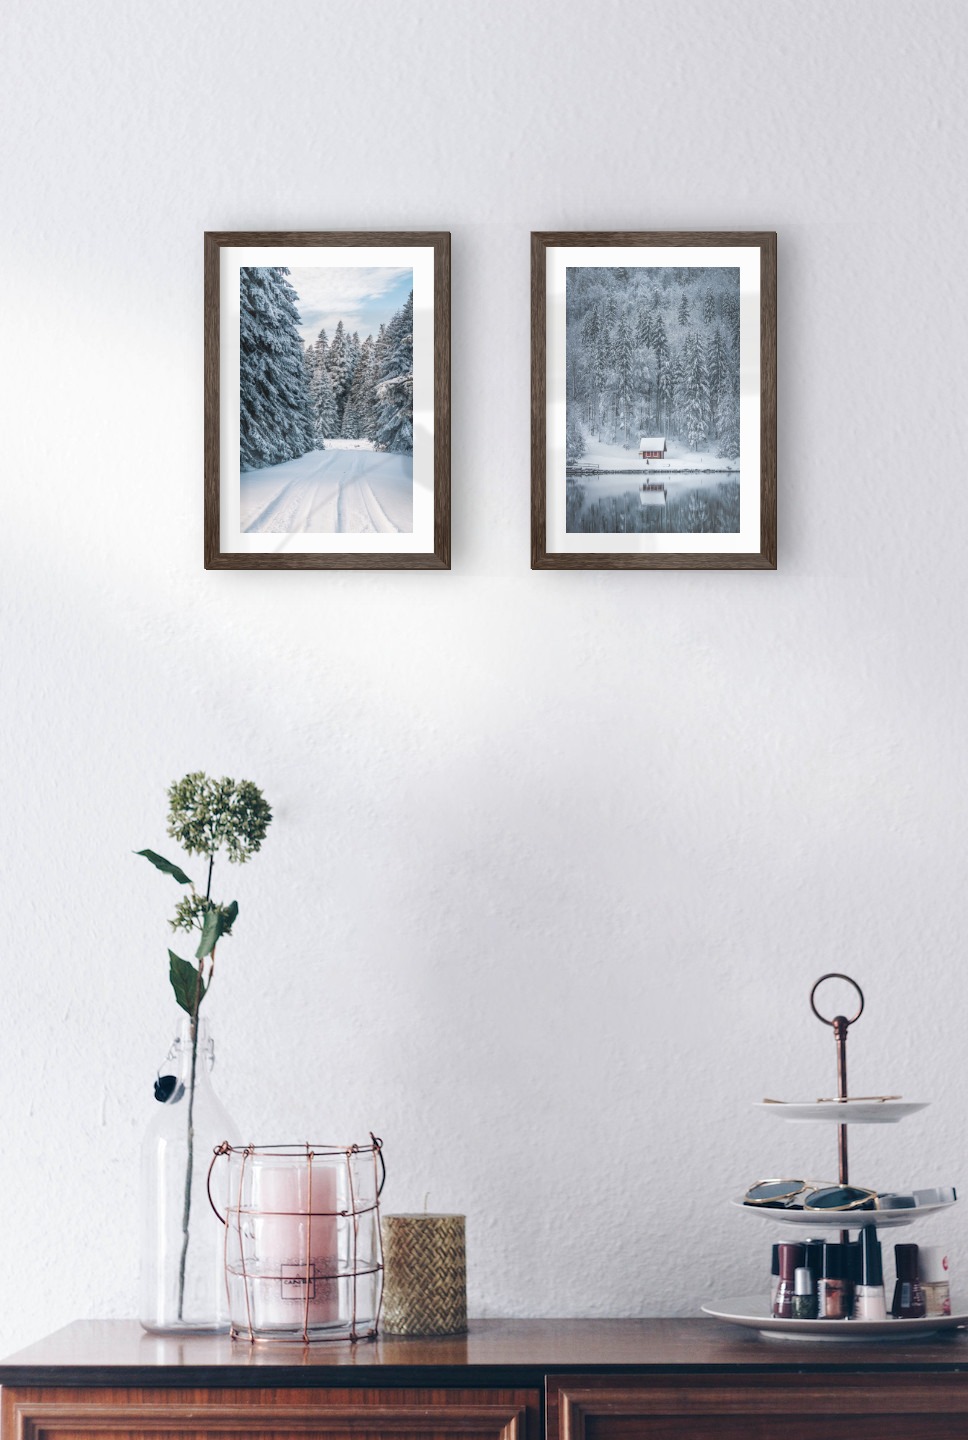 Gallery wall with picture frames in dark wood in sizes 21x30 with prints "Snowy road" and "Cottage by the lake"